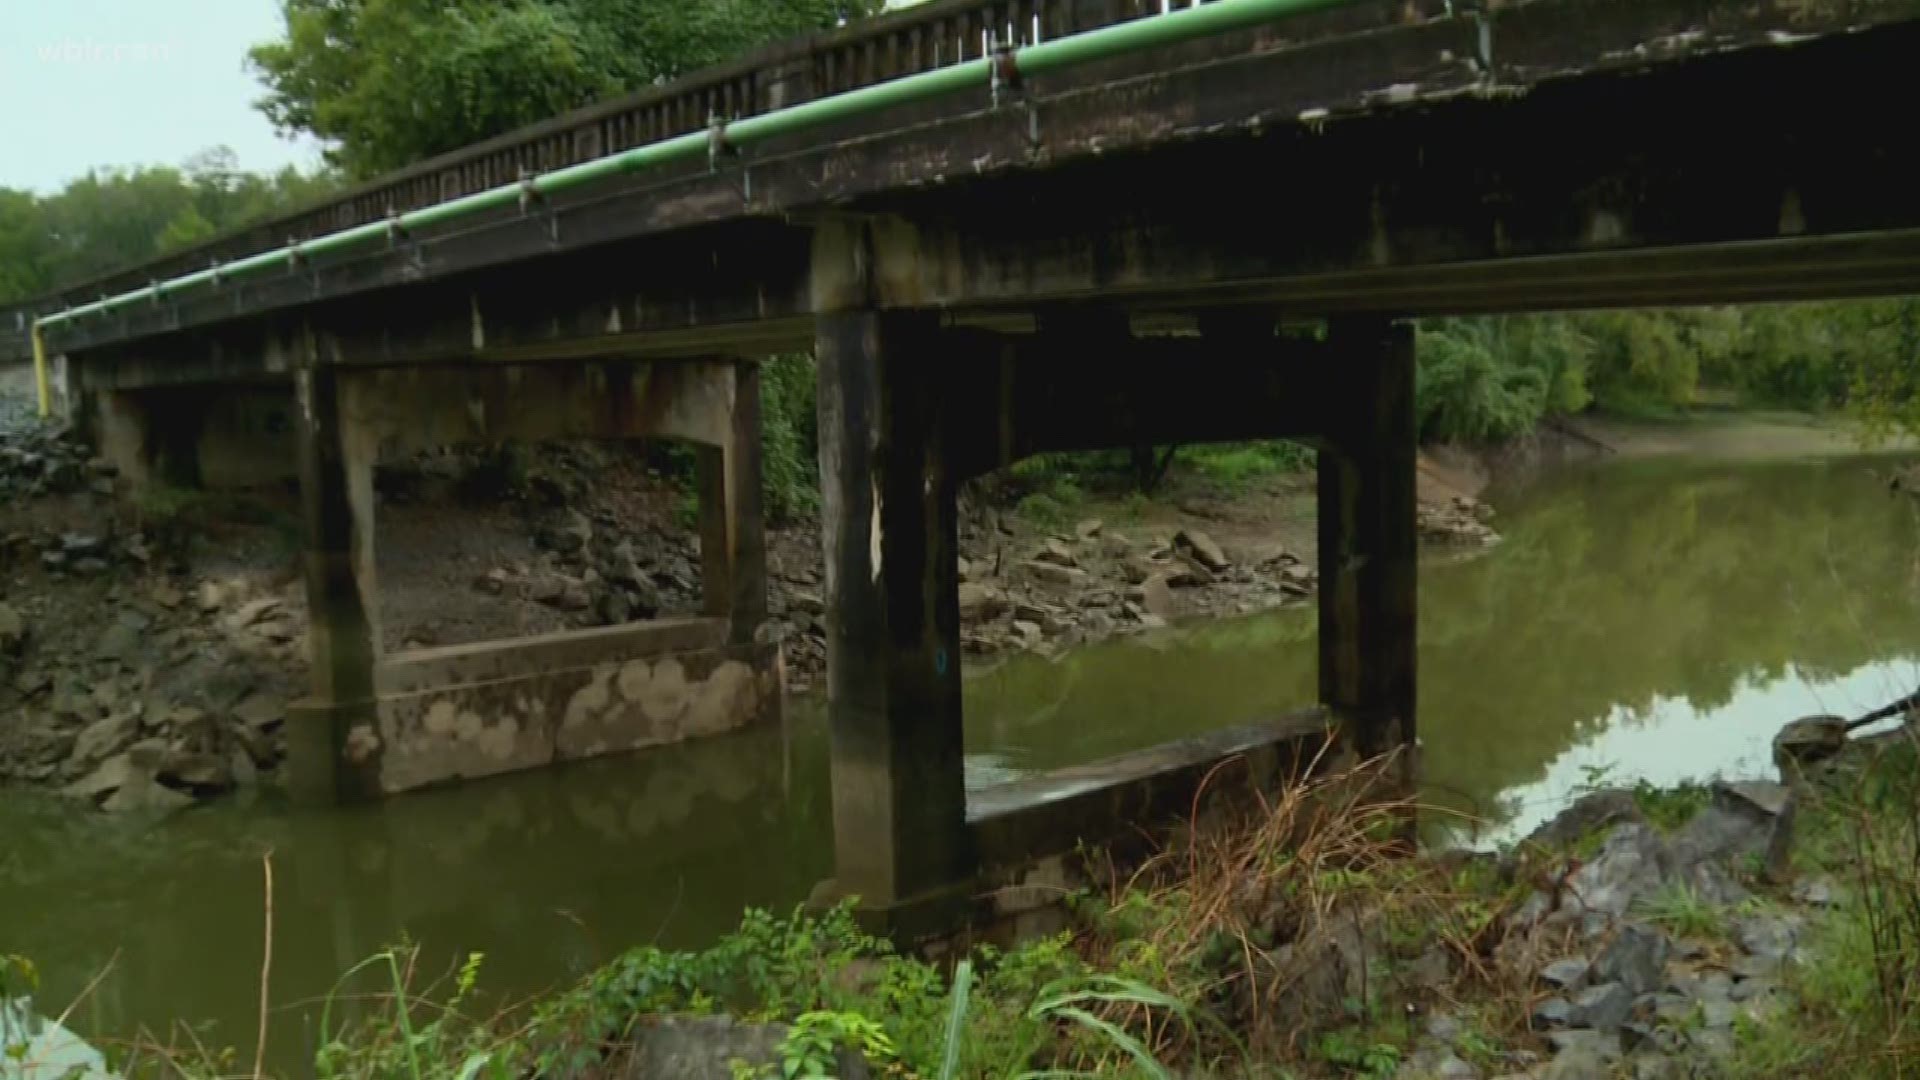 A Fed-Ex driver from Hawkins County says he saved a woman from jumping off a bridge earlier this week.